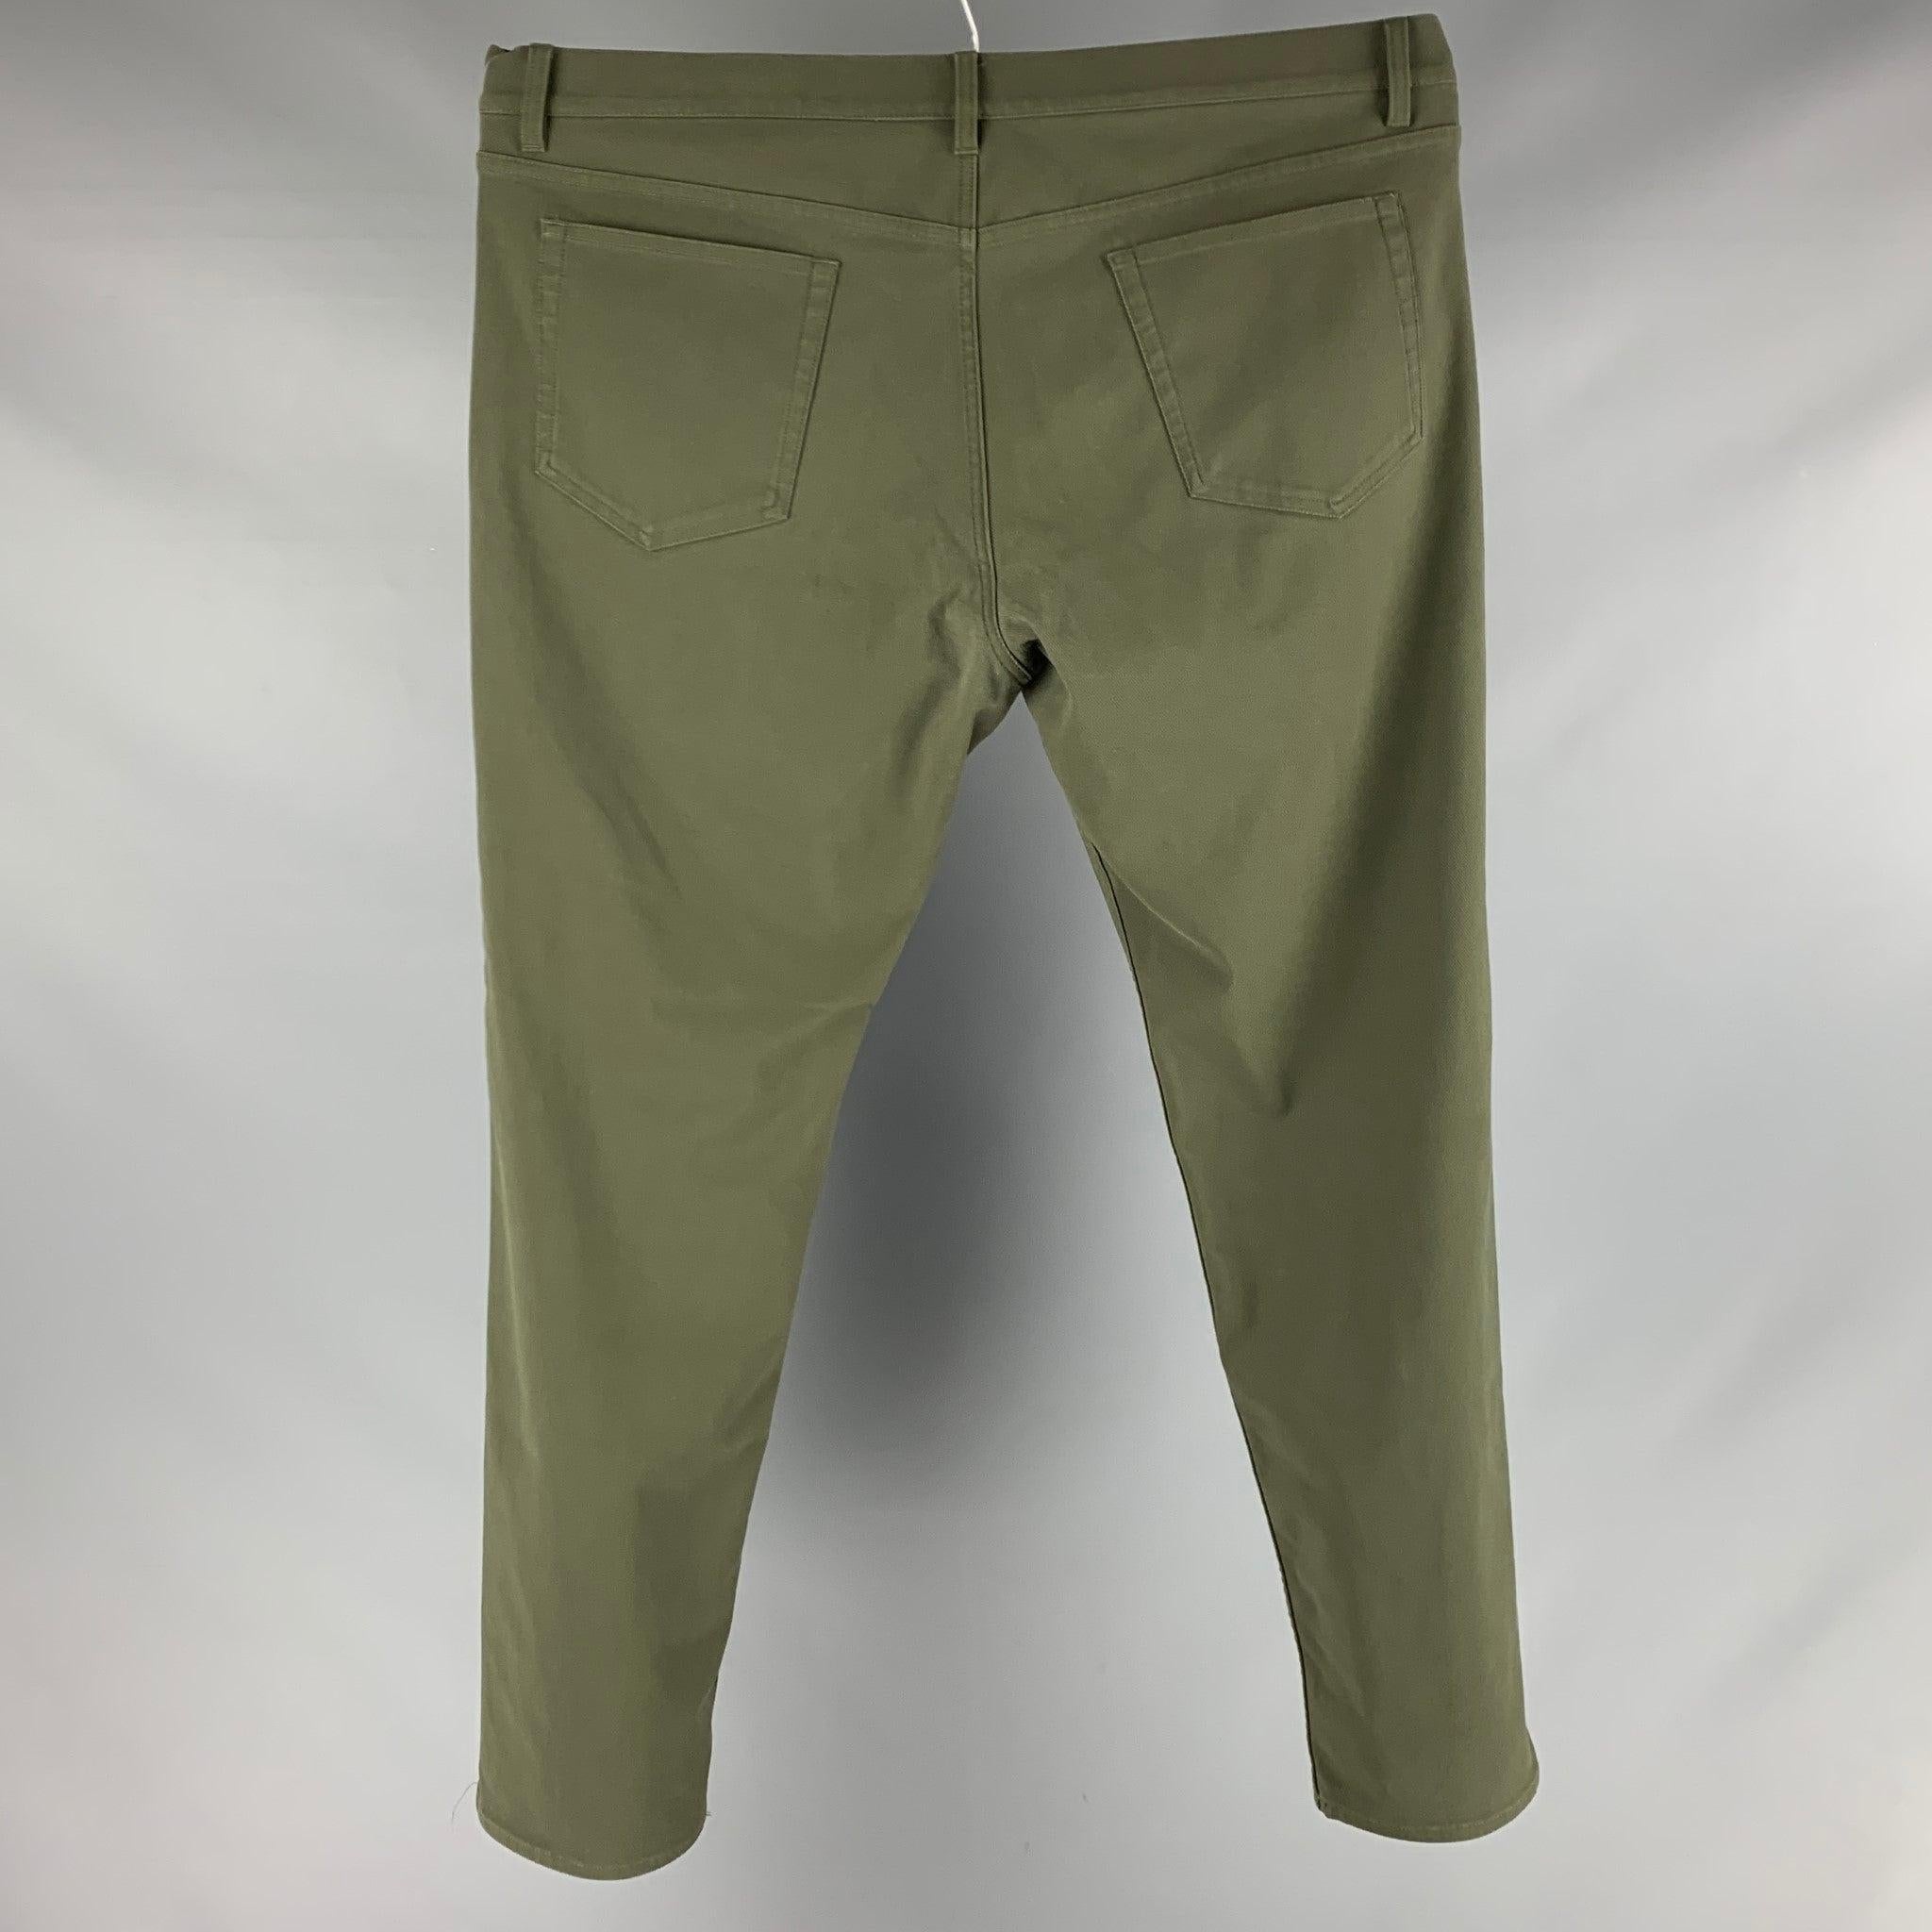 THEORY casual pants comes in a green cotton blend twill featuring a flat front and a zip fly closure.Excellent Pre- Owned Material. 

Marked:   40 

Measurements: 
  Waist: 43 inches Rise: 10.5 inches Inseam: 31.5 inches 
 
  
  
 
Reference: